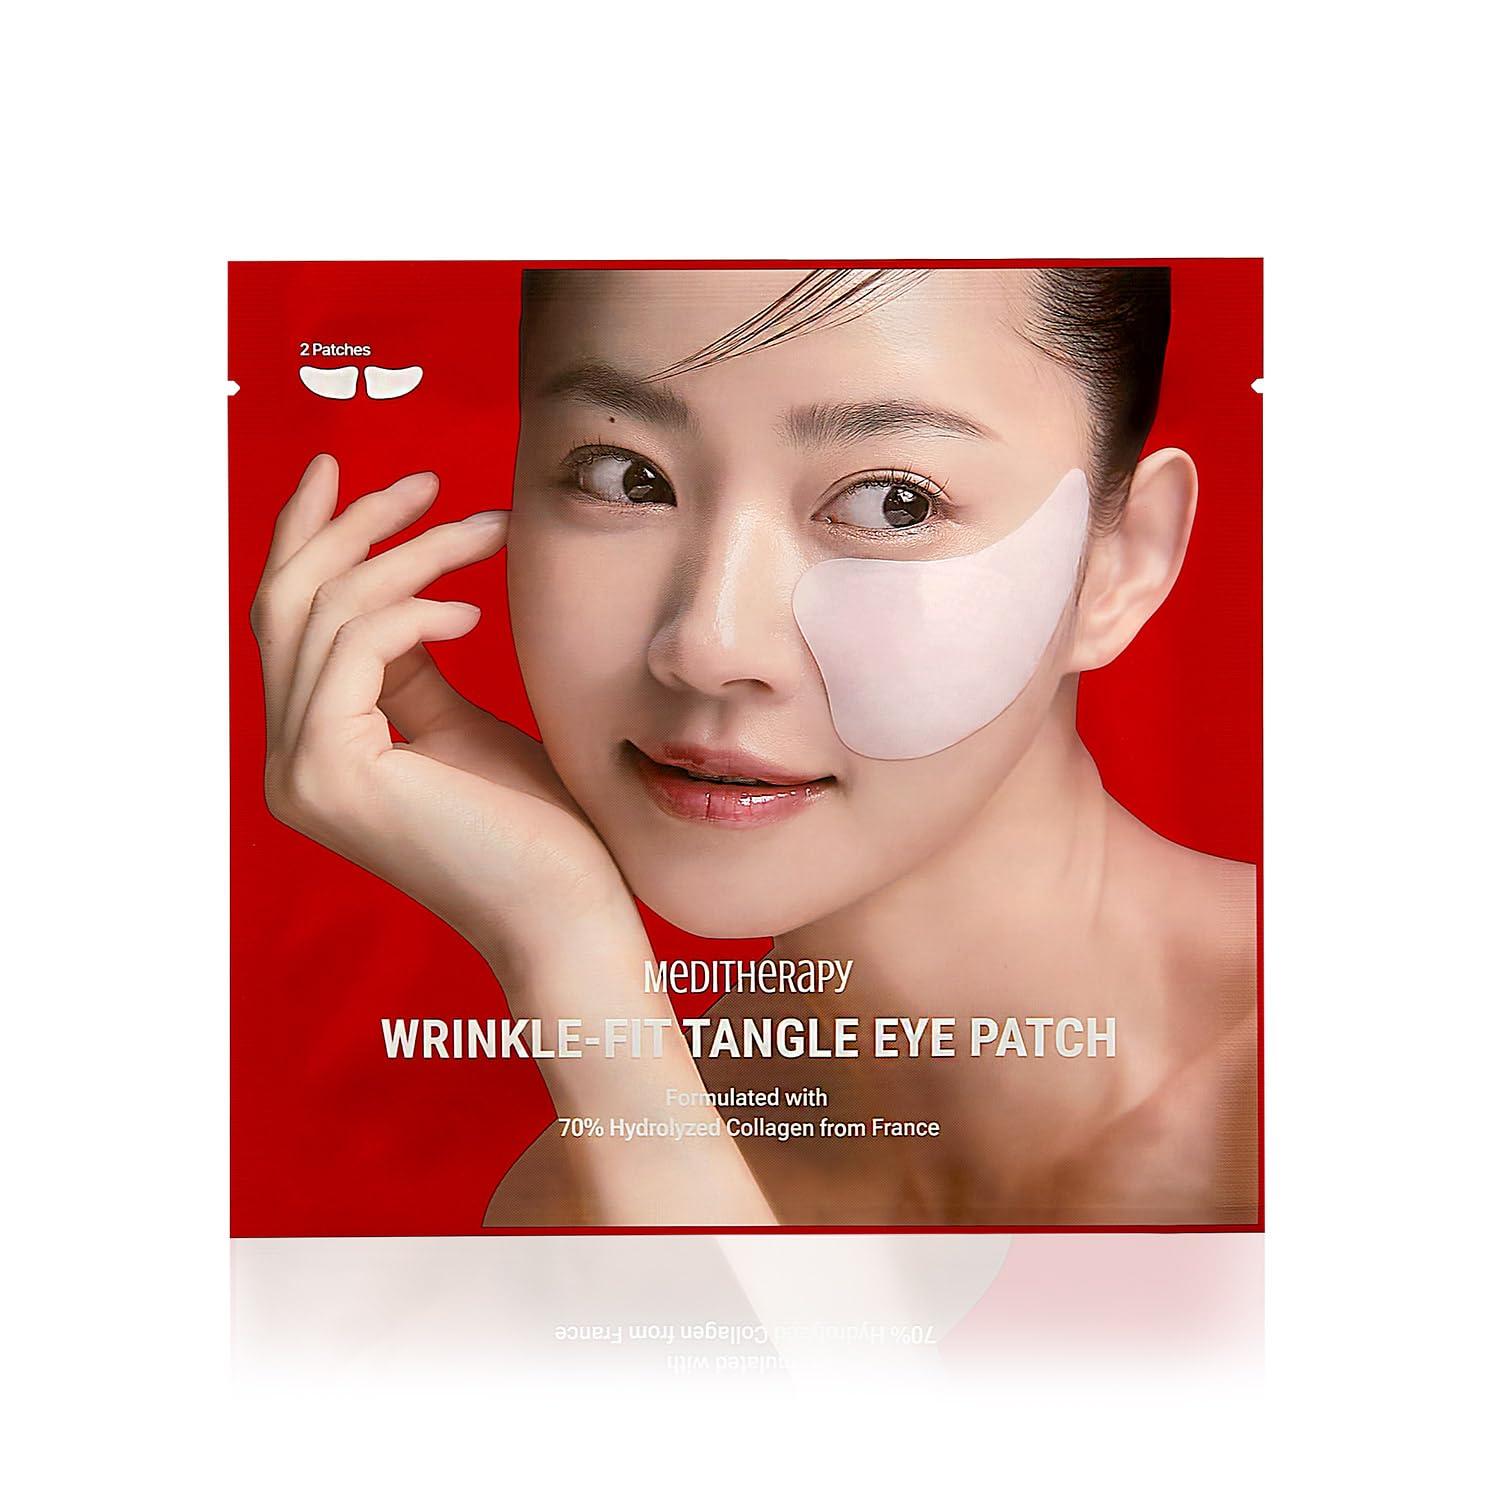 Wrinkle-Fit Tangle Eye Patch